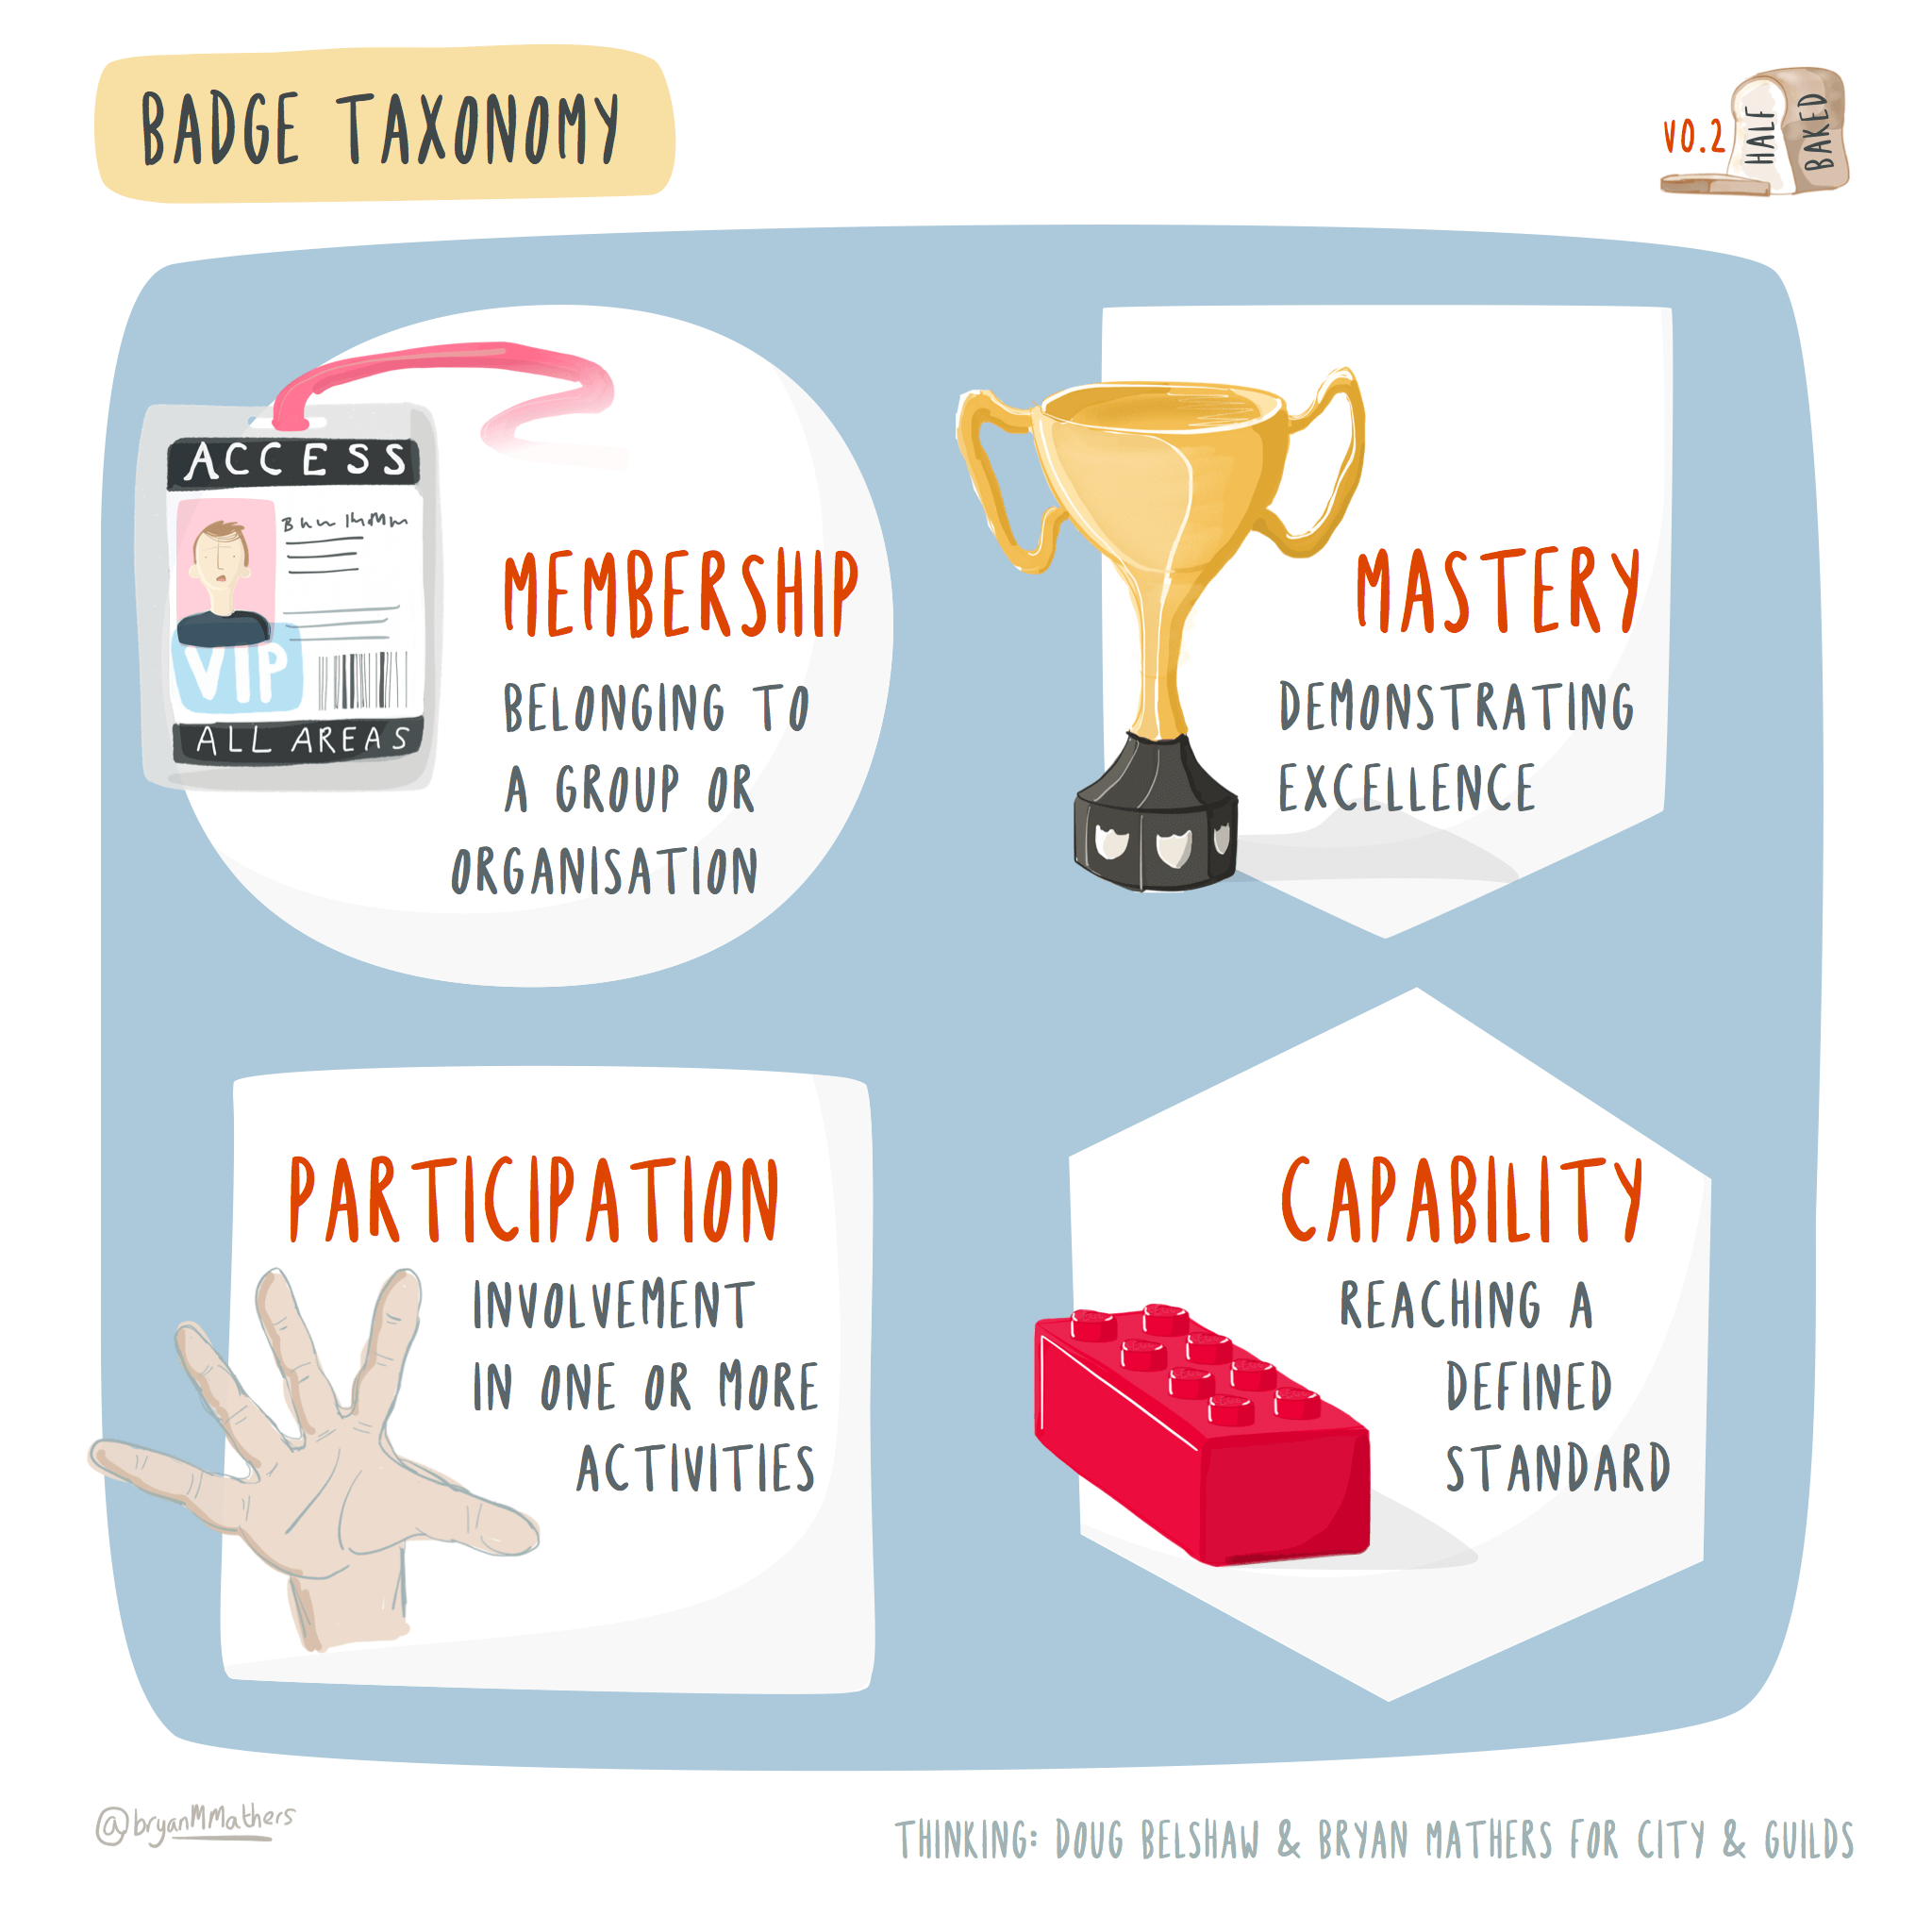 There are many different achievements which badges can be awarded for including membership, participation, capability and mastery. Badge taxonomy by Visual Thinkery is licensed under CC-BY-ND